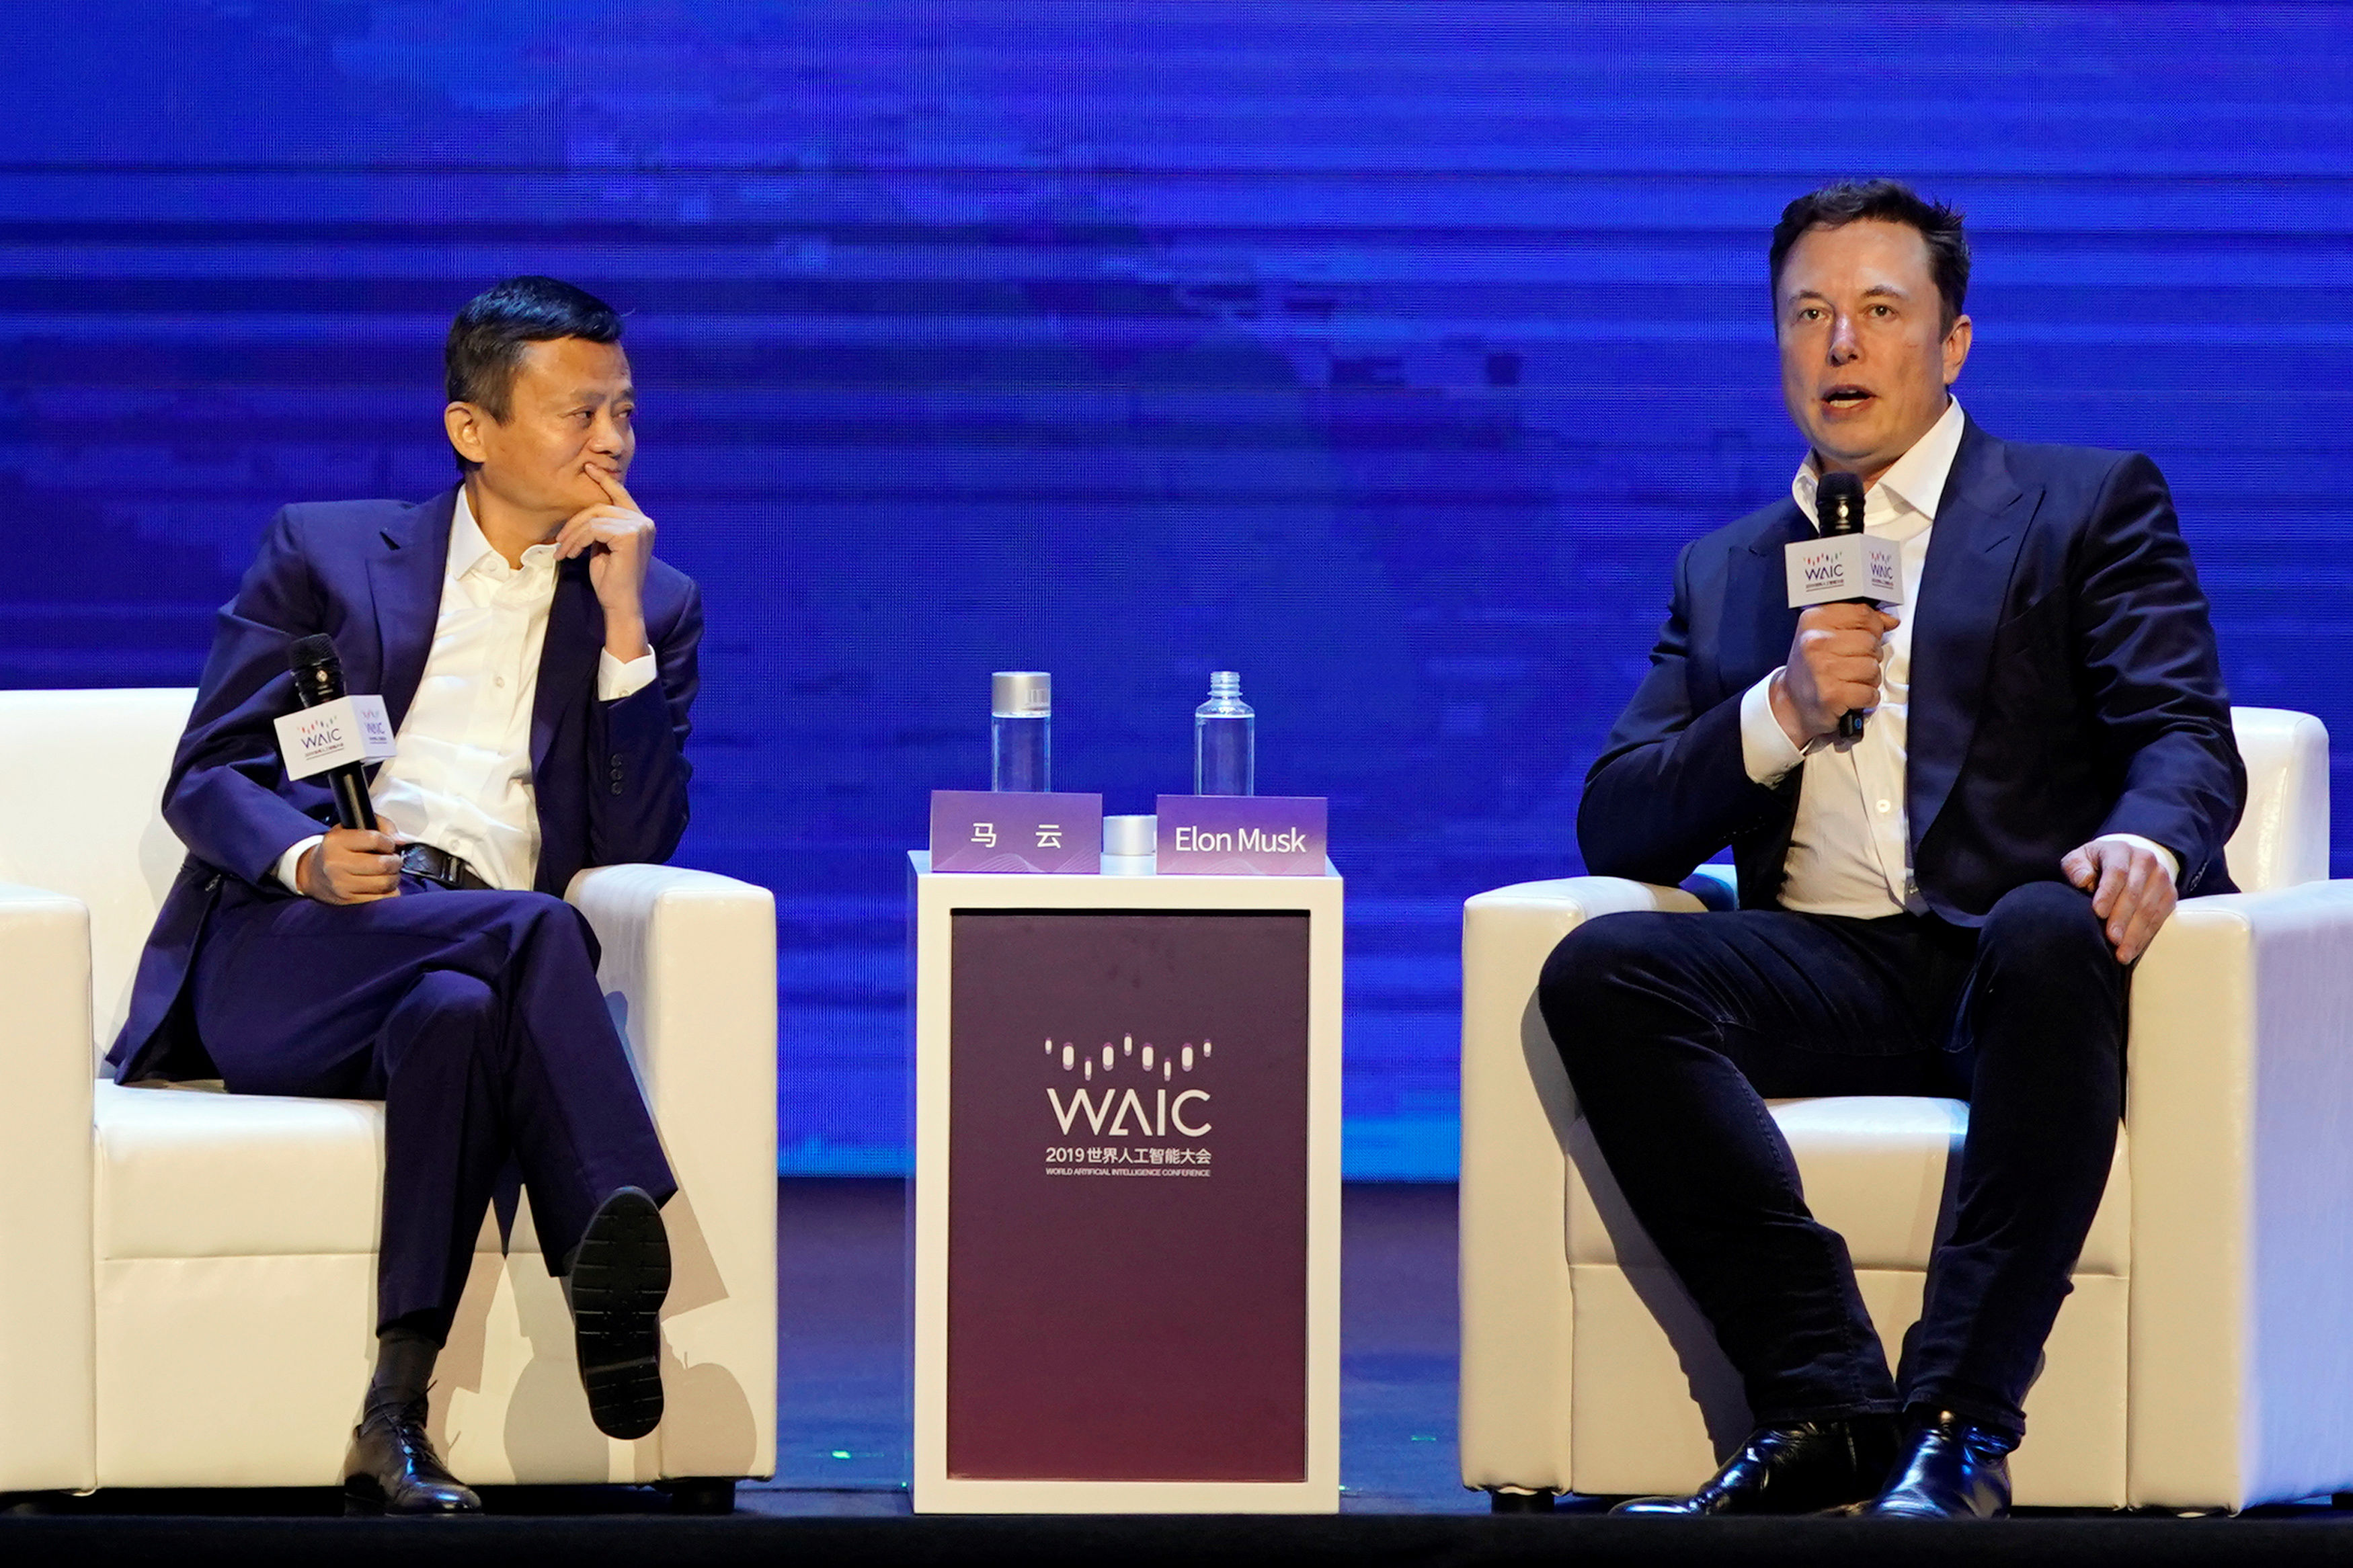 Tesla Inc CEO Musk and Alibaba Group Holding Ltd Executive Chairman Ma attend the World Artificial Intelligence Conference in Shanghai